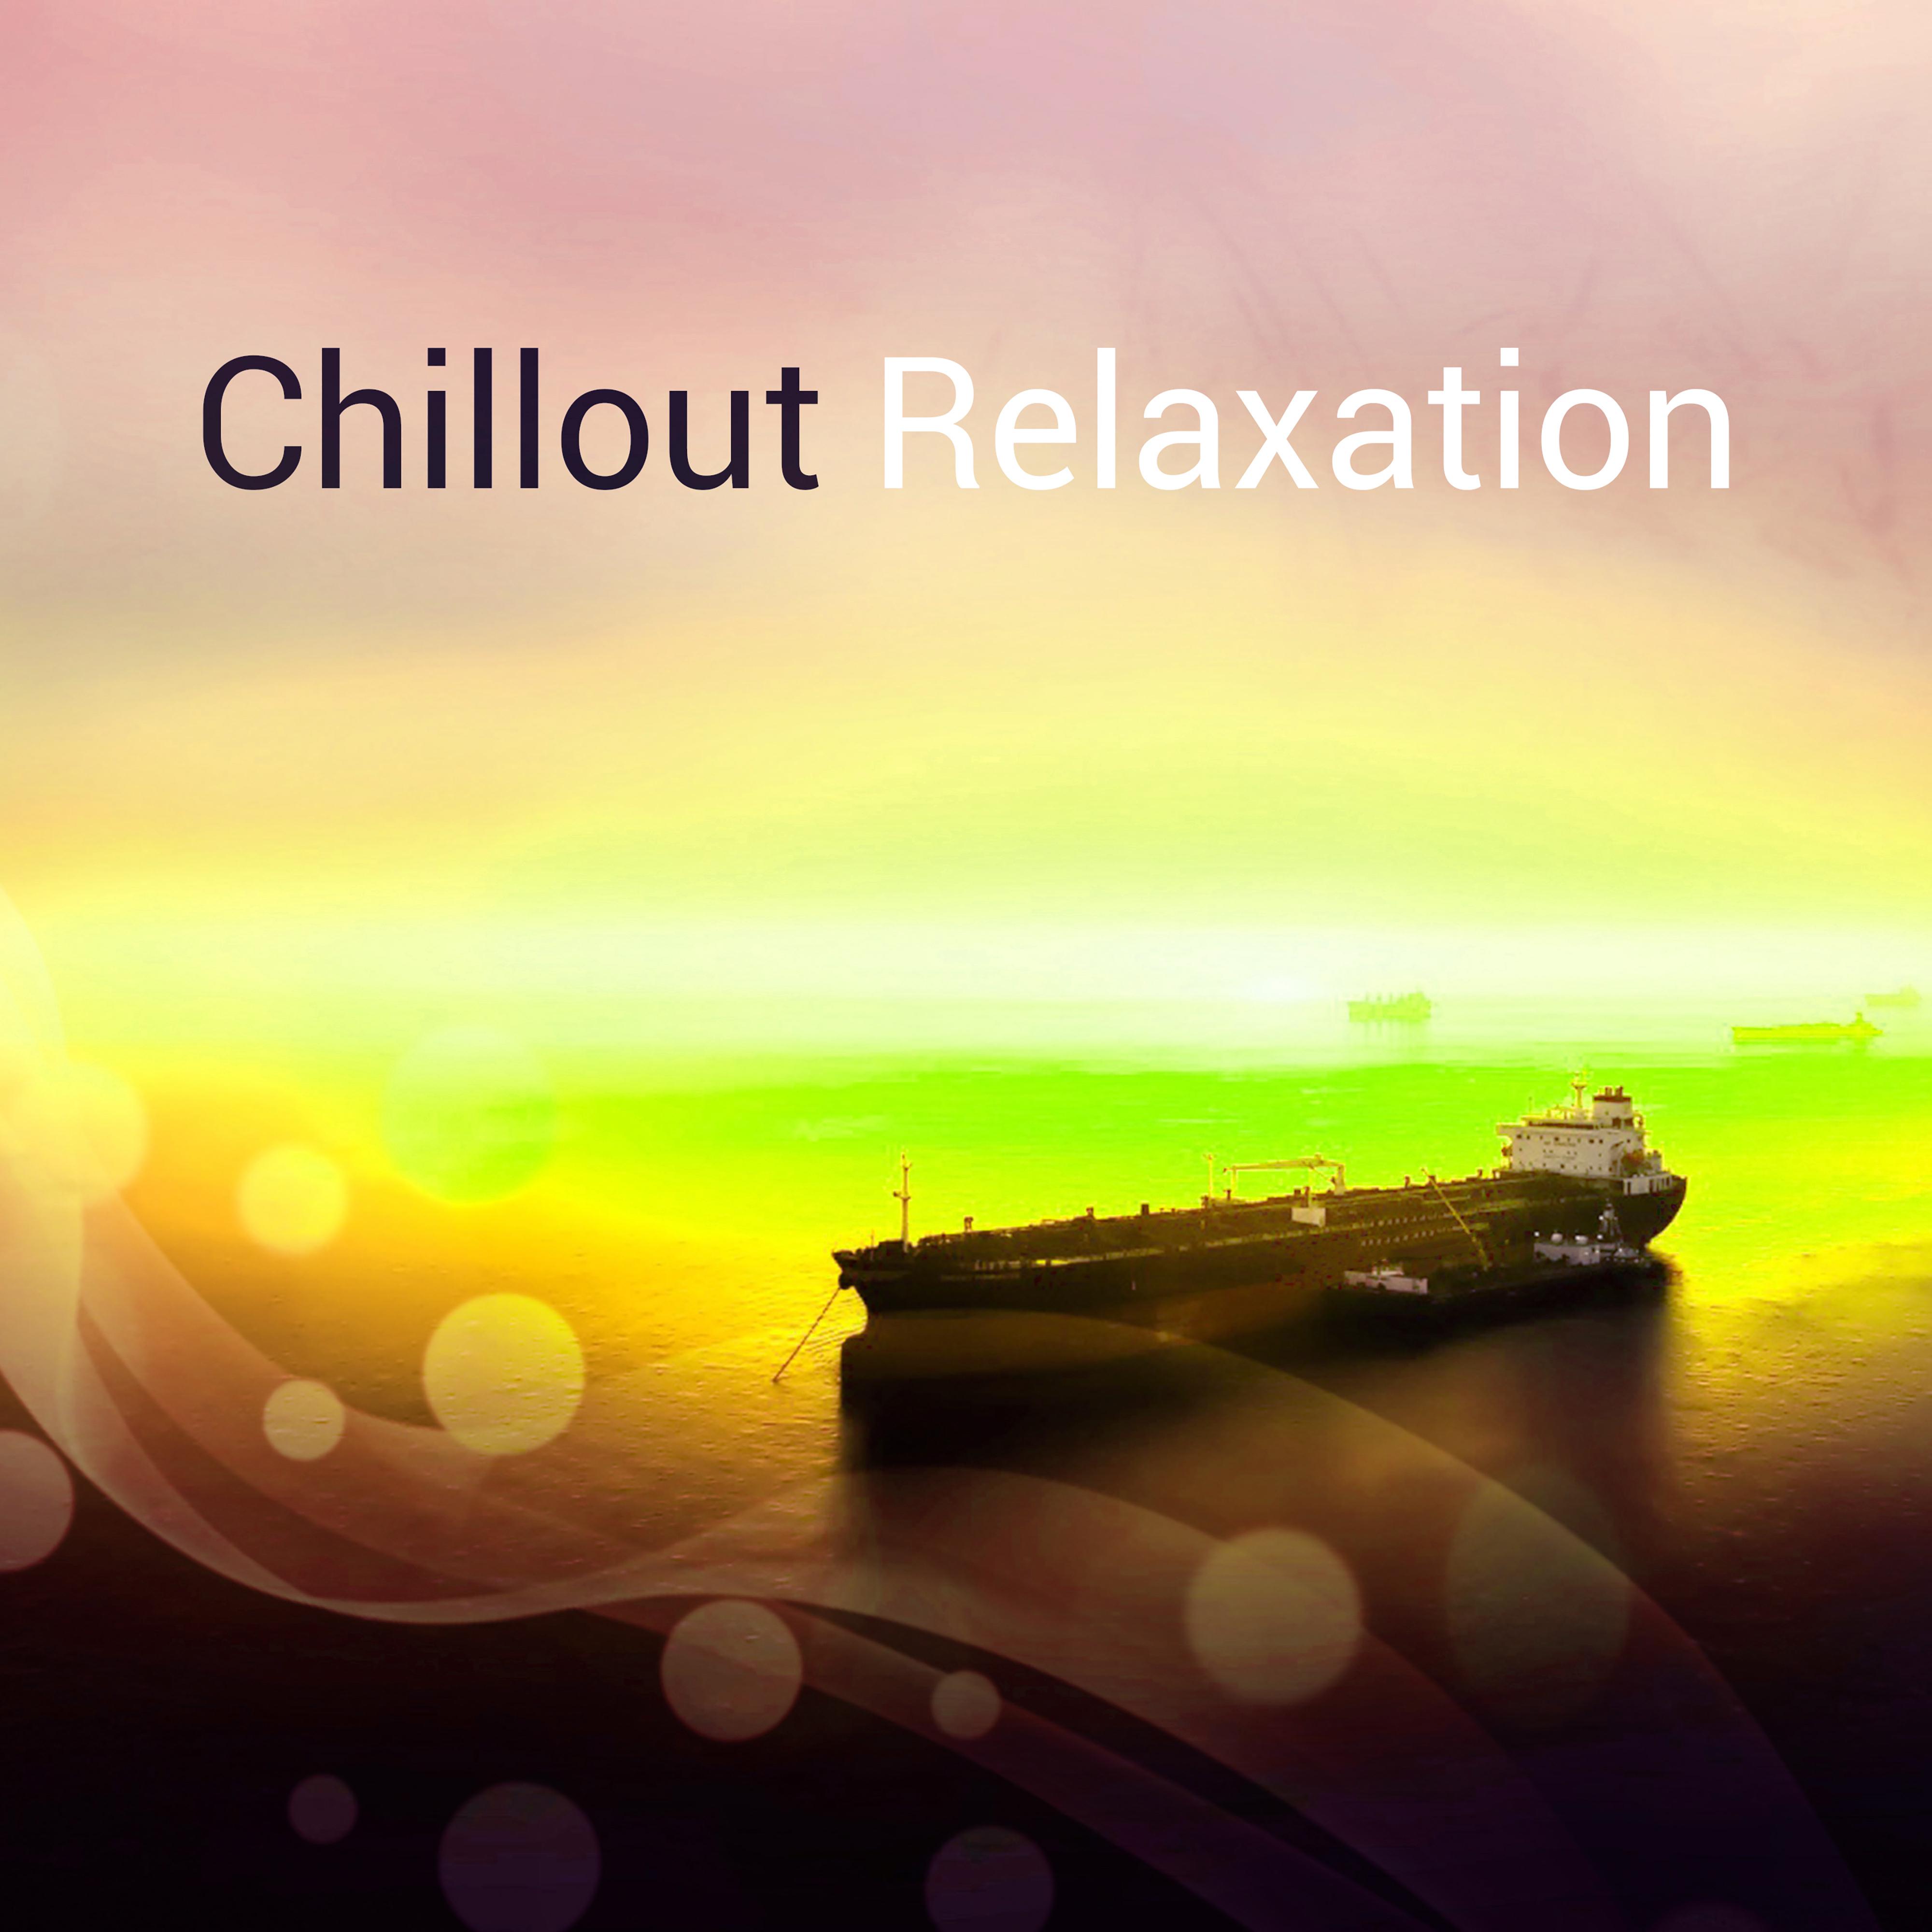 Chillout Relaxation  Chill Out Music, Relax, Rest, Essential, Electronic Vibes